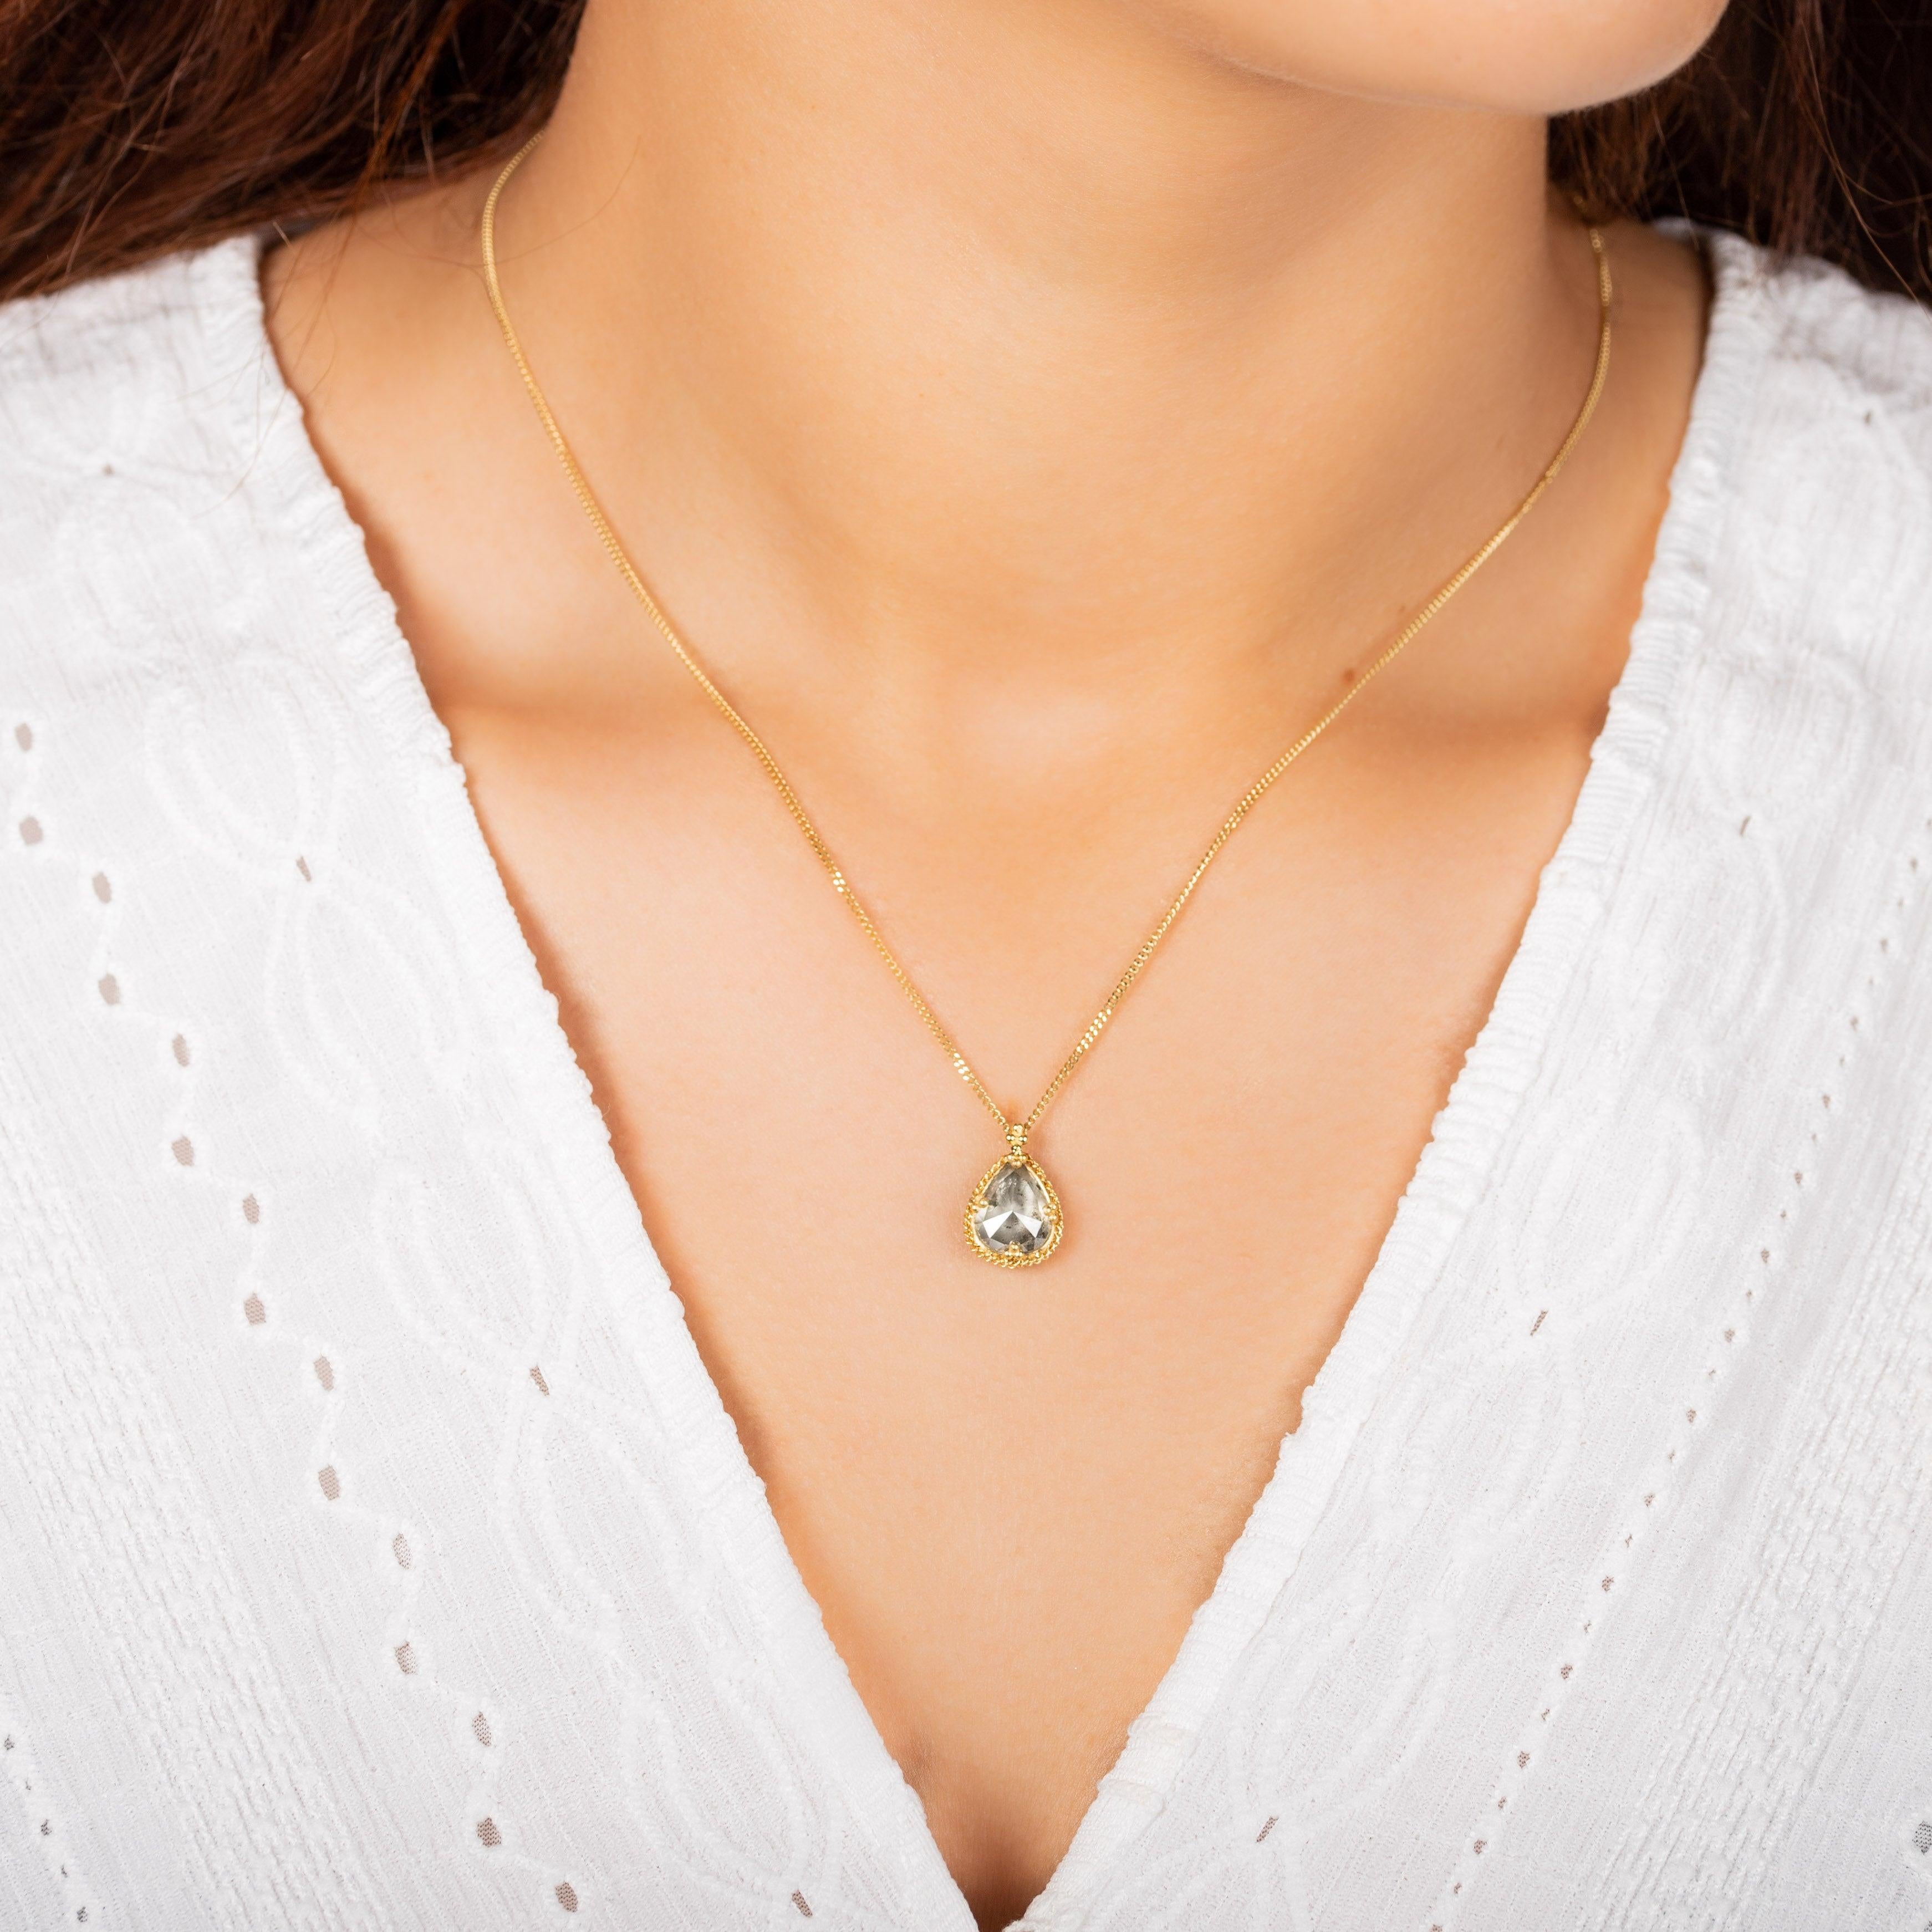 The lush facets of this delightfully chubby pear shaped Diamond glisten with a starlit subtlety, catching and reflecting light like the glittering, mysterious twinkle of celestial jewels in the night sky. Suspended from an 18K yellow gold chain,